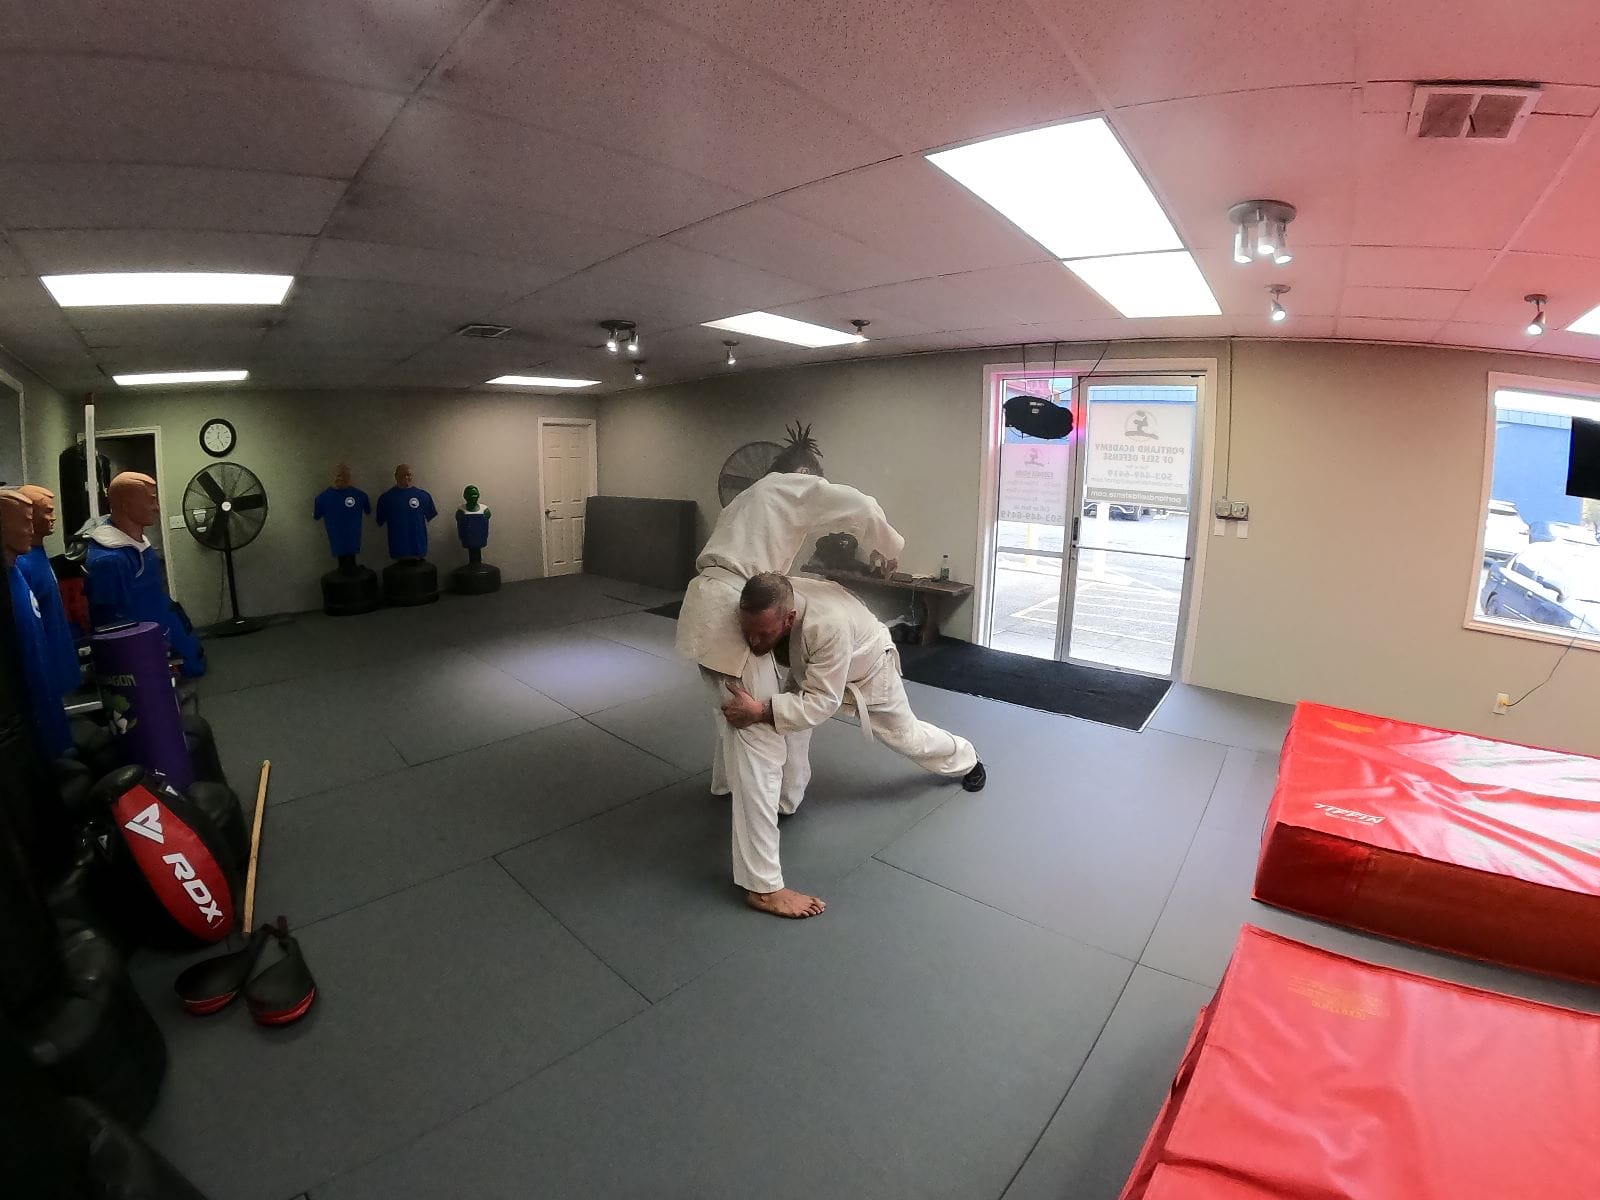 OUR ADULT HAPKIDO SELF‑DEFENSE CLASSES ARE FUN, FUNCTIONAL AND INTENSIVE!